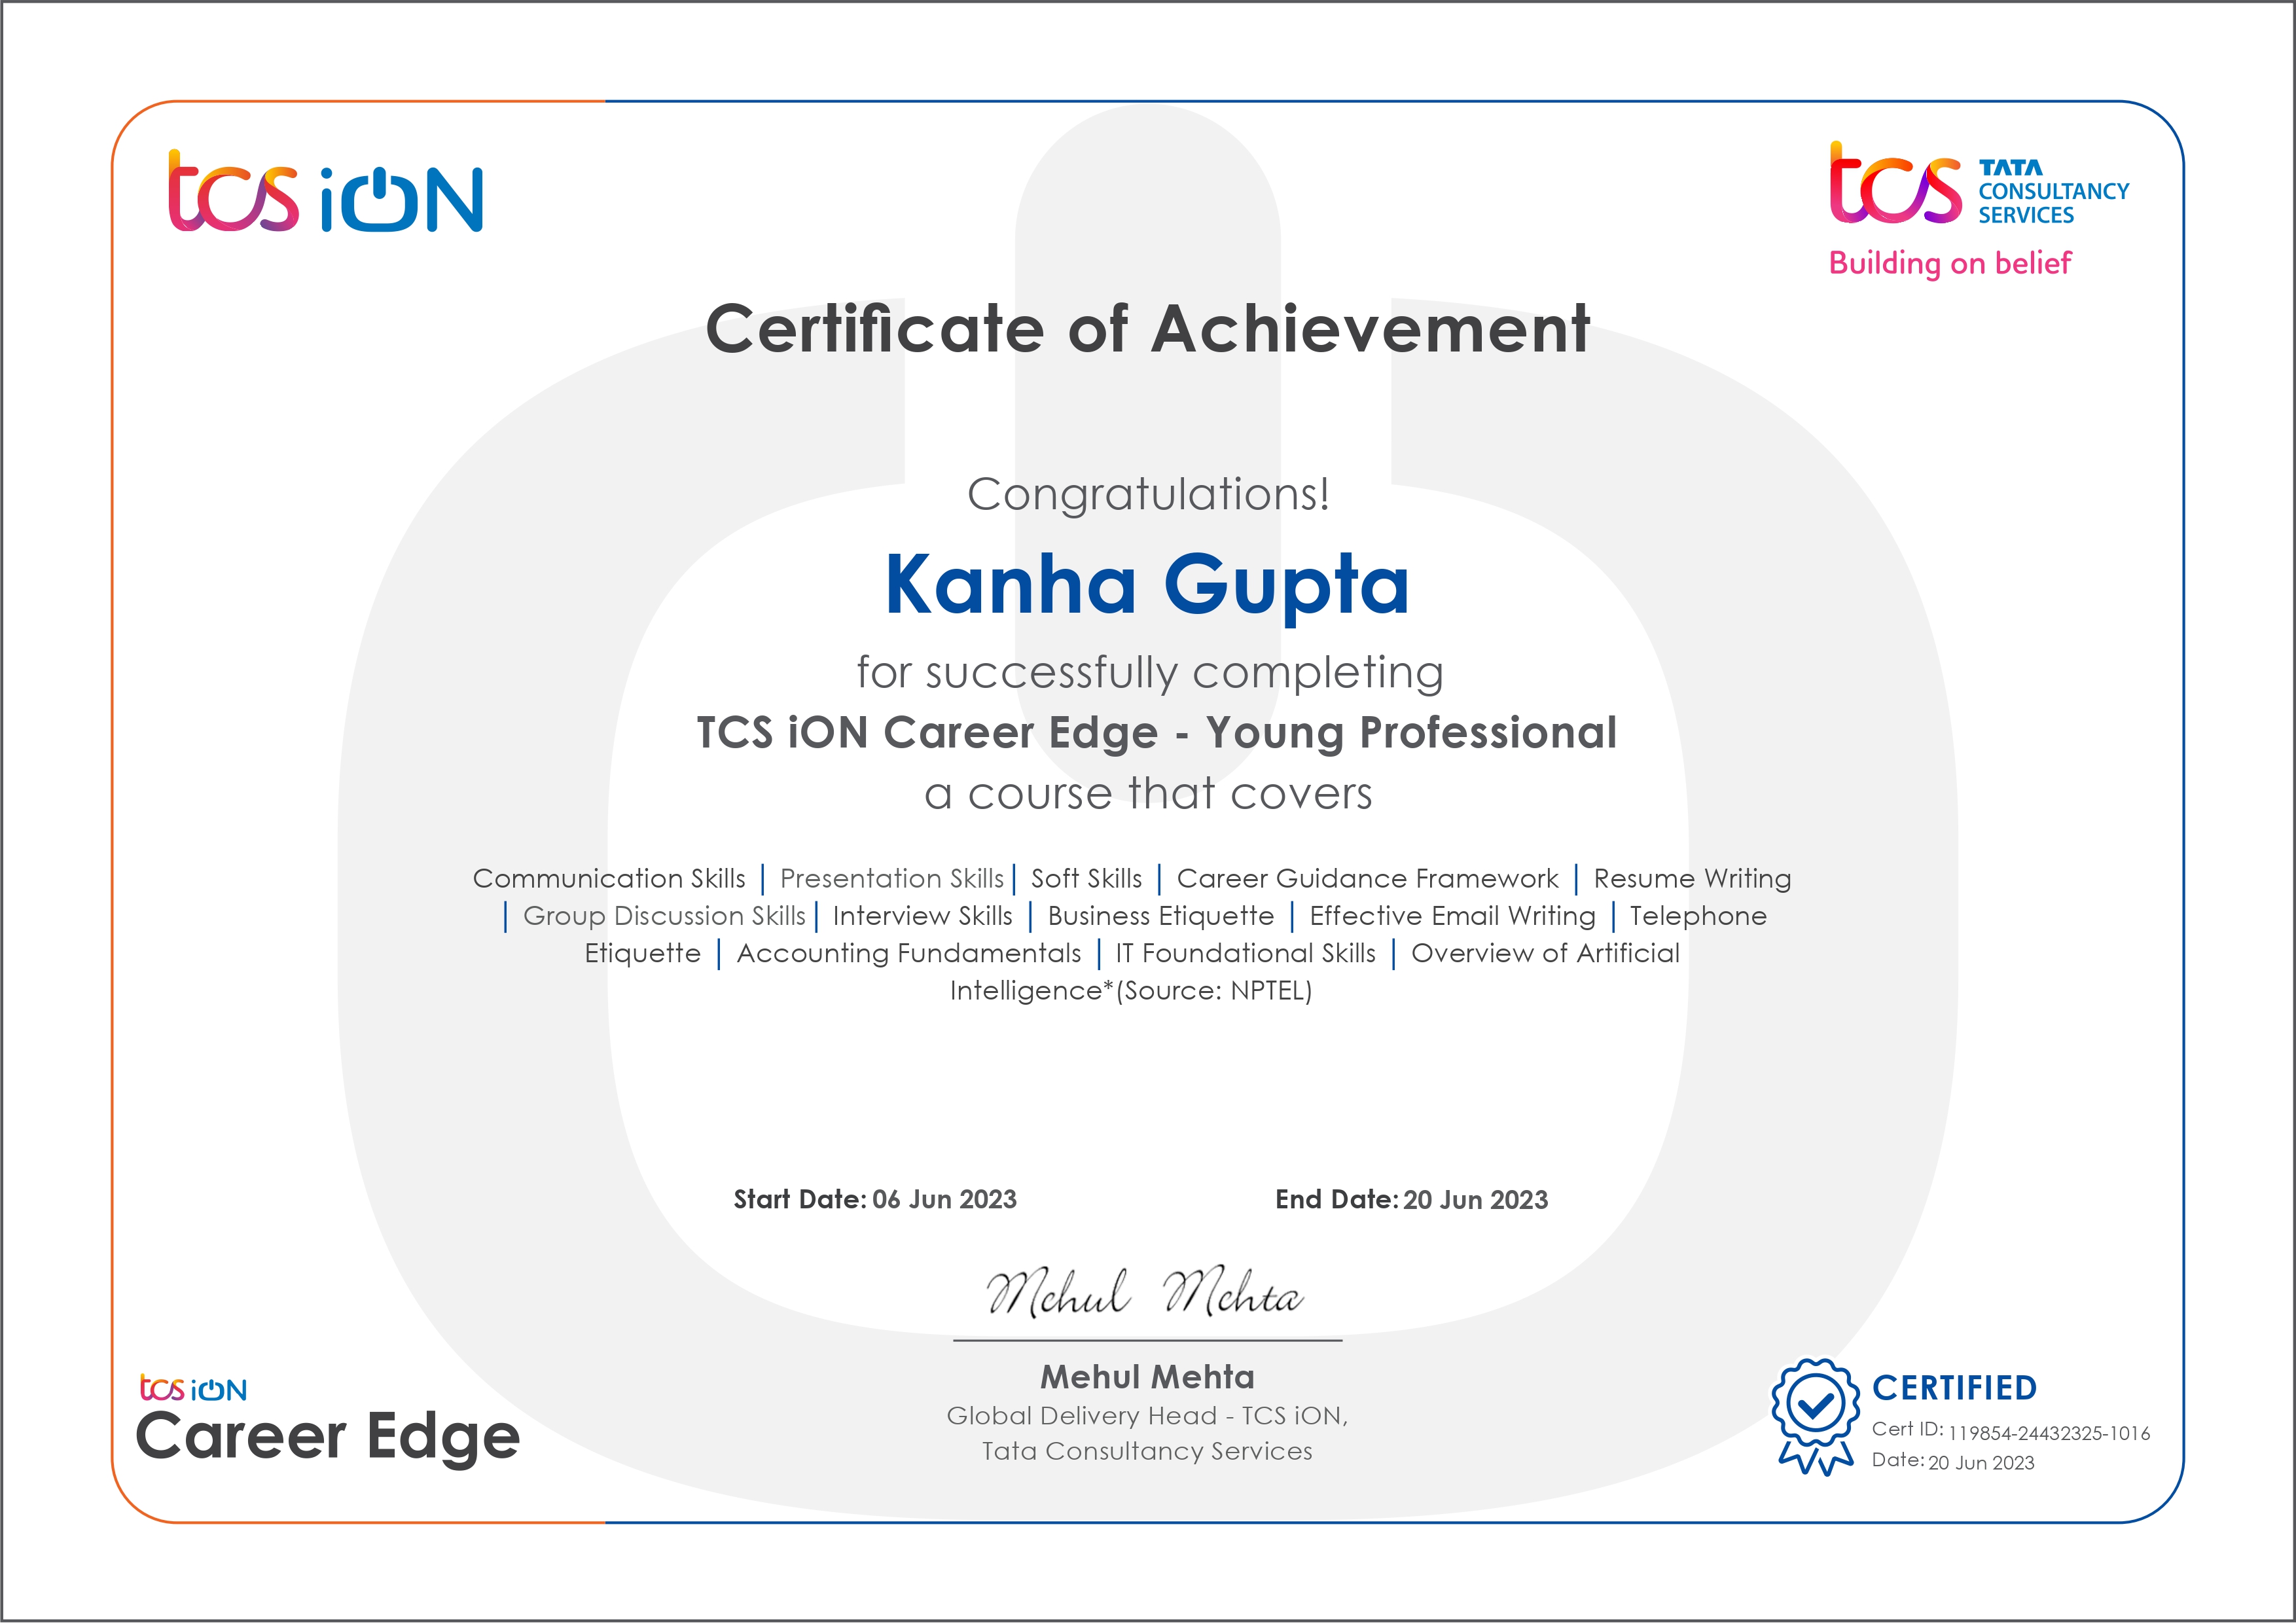 Young Professional Course Certificate, TCS iON Career Edge